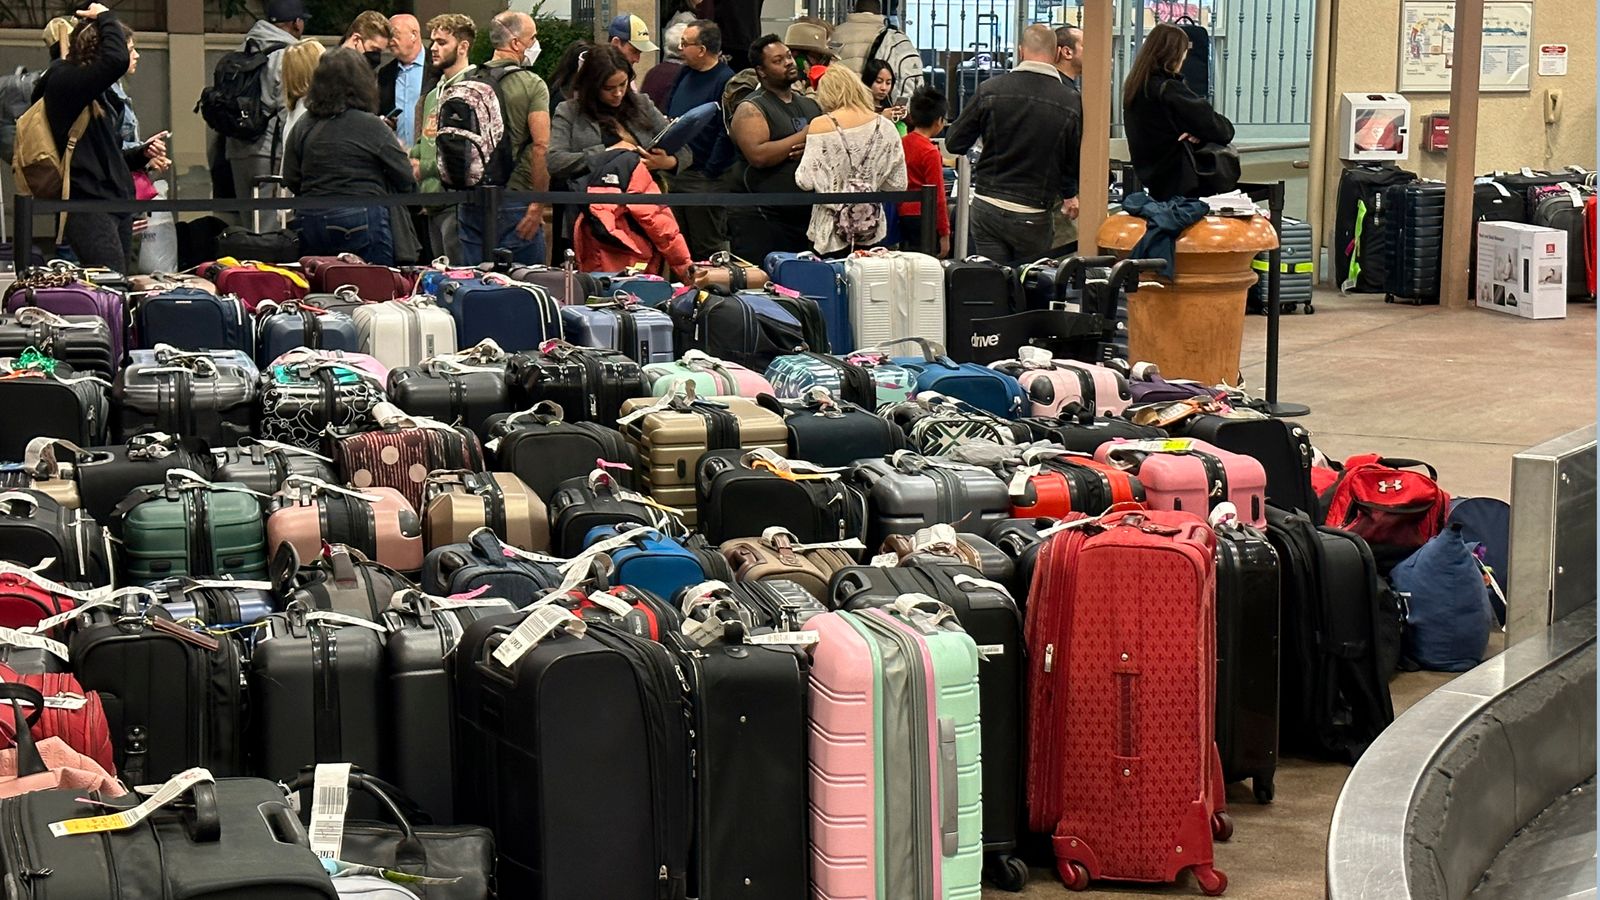 How an airline passenger tracked the 'wild ride' of her lost luggage